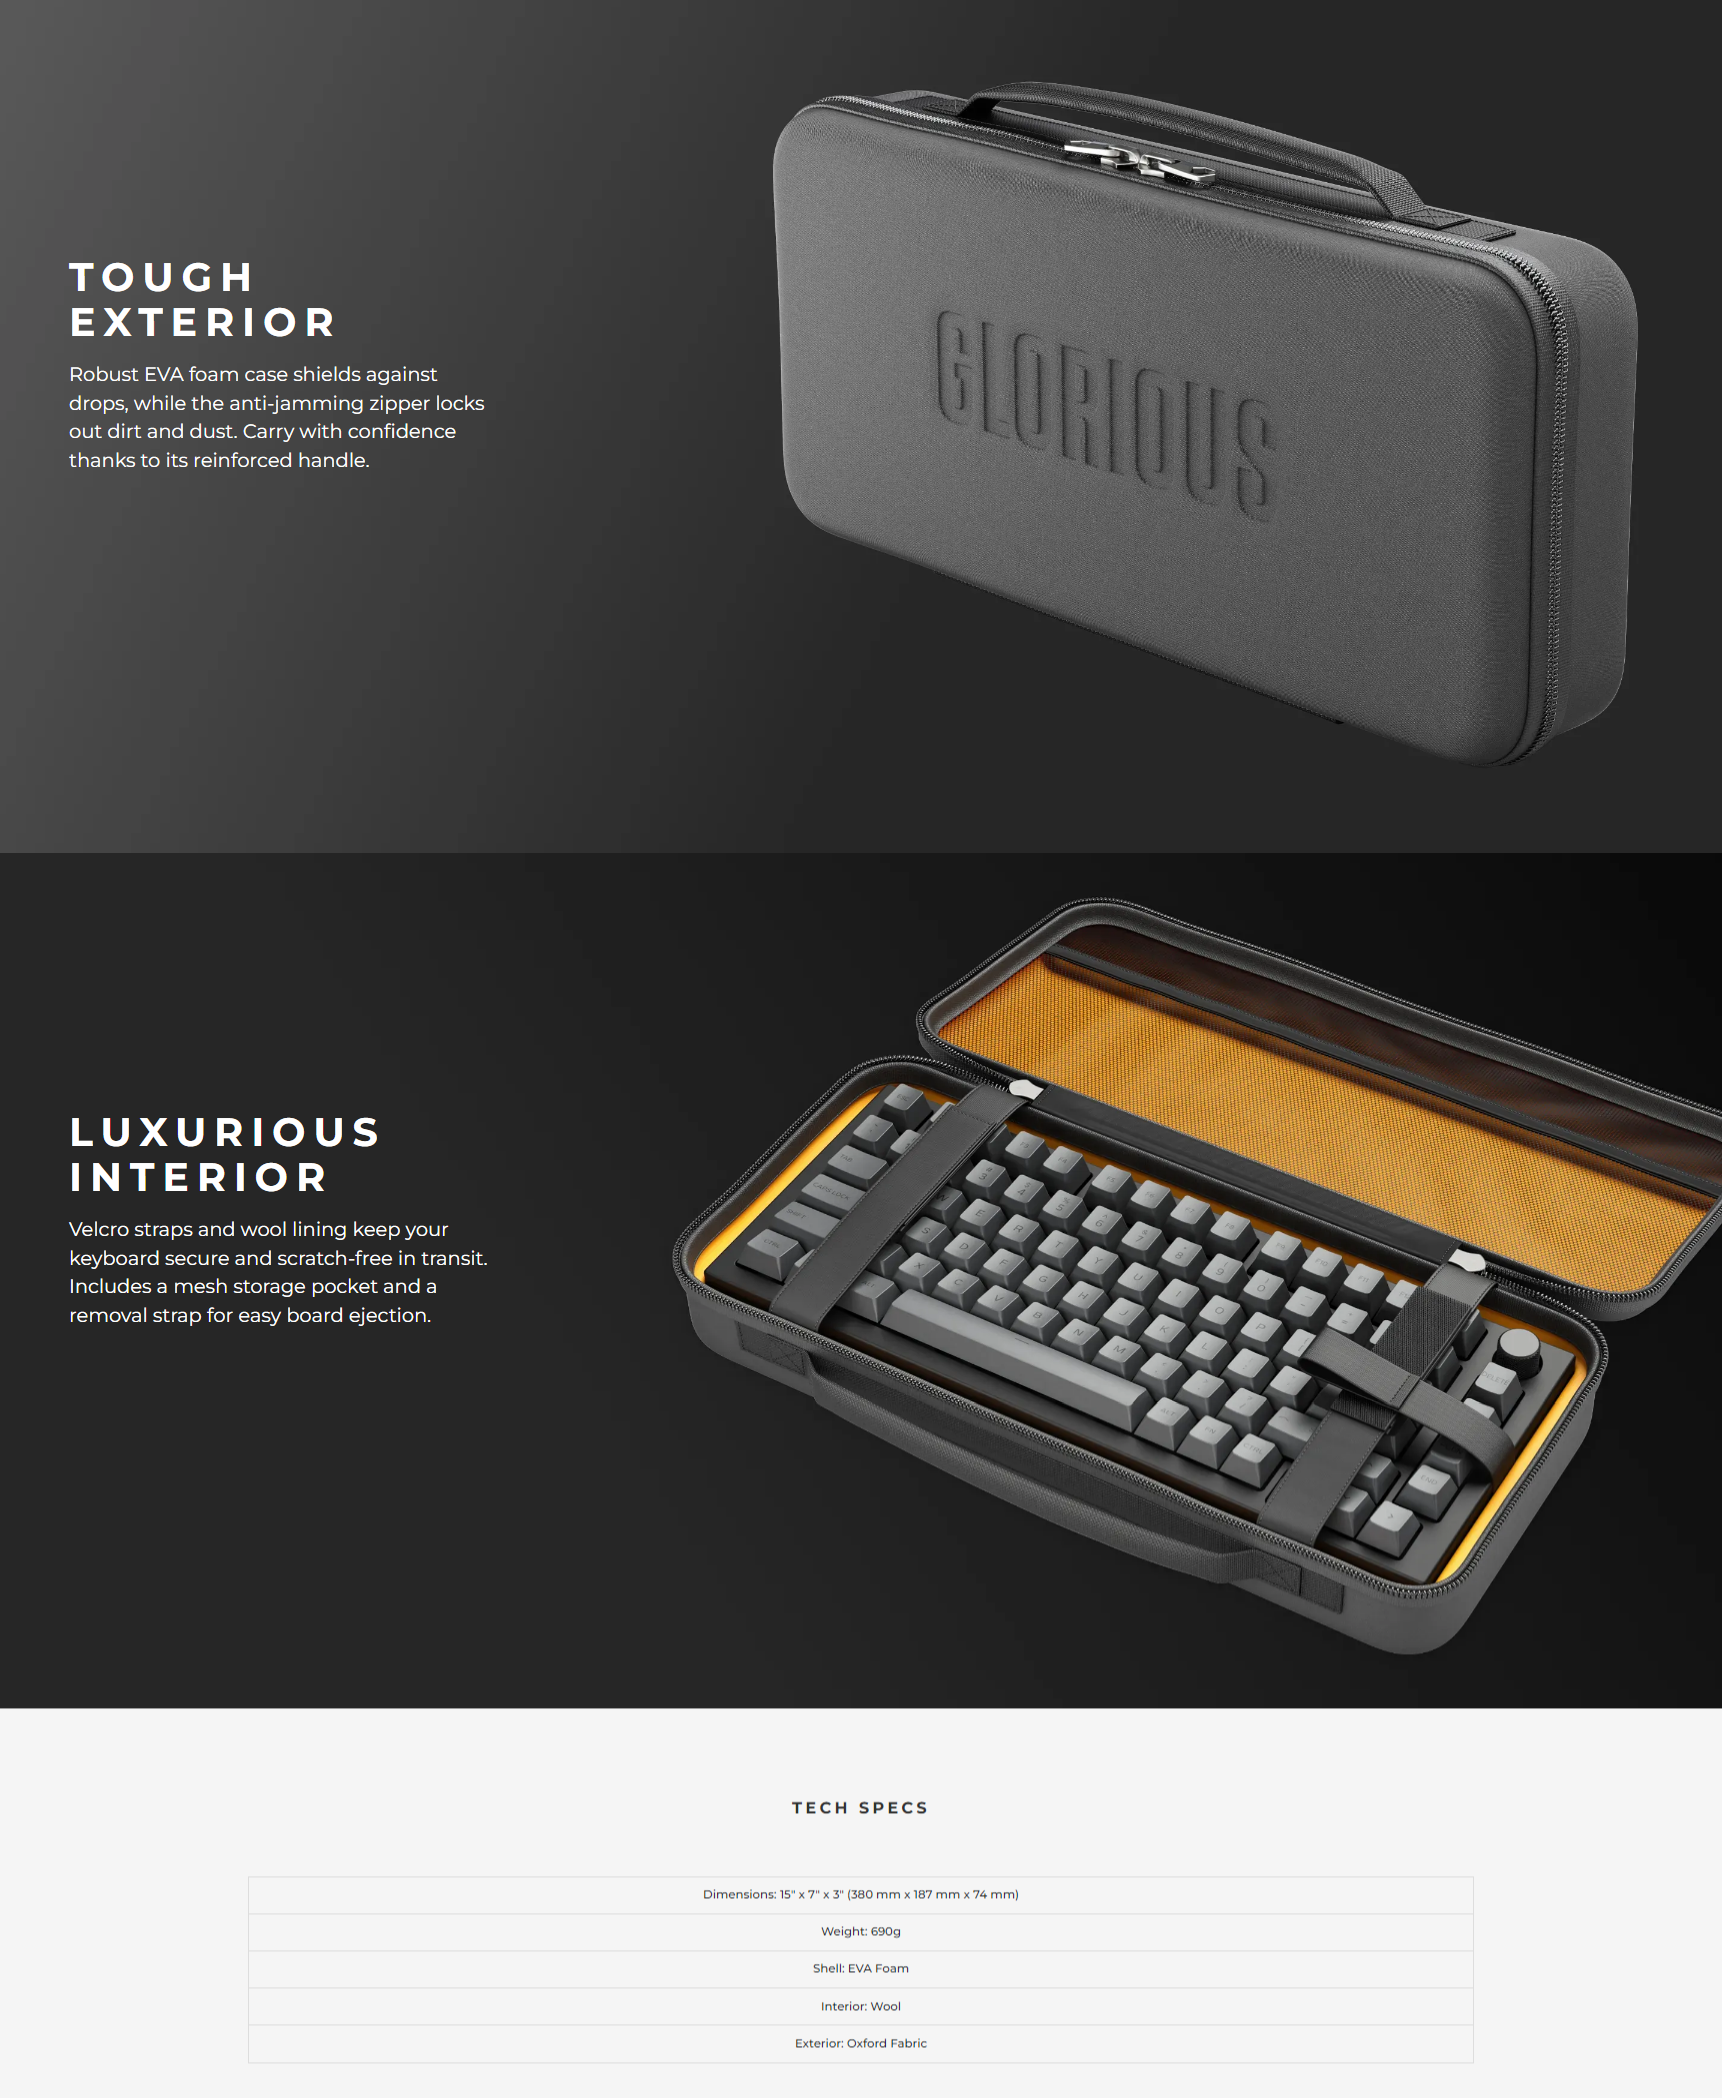 A large marketing image providing additional information about the product Glorious Keyboard Carrying Case - Additional alt info not provided